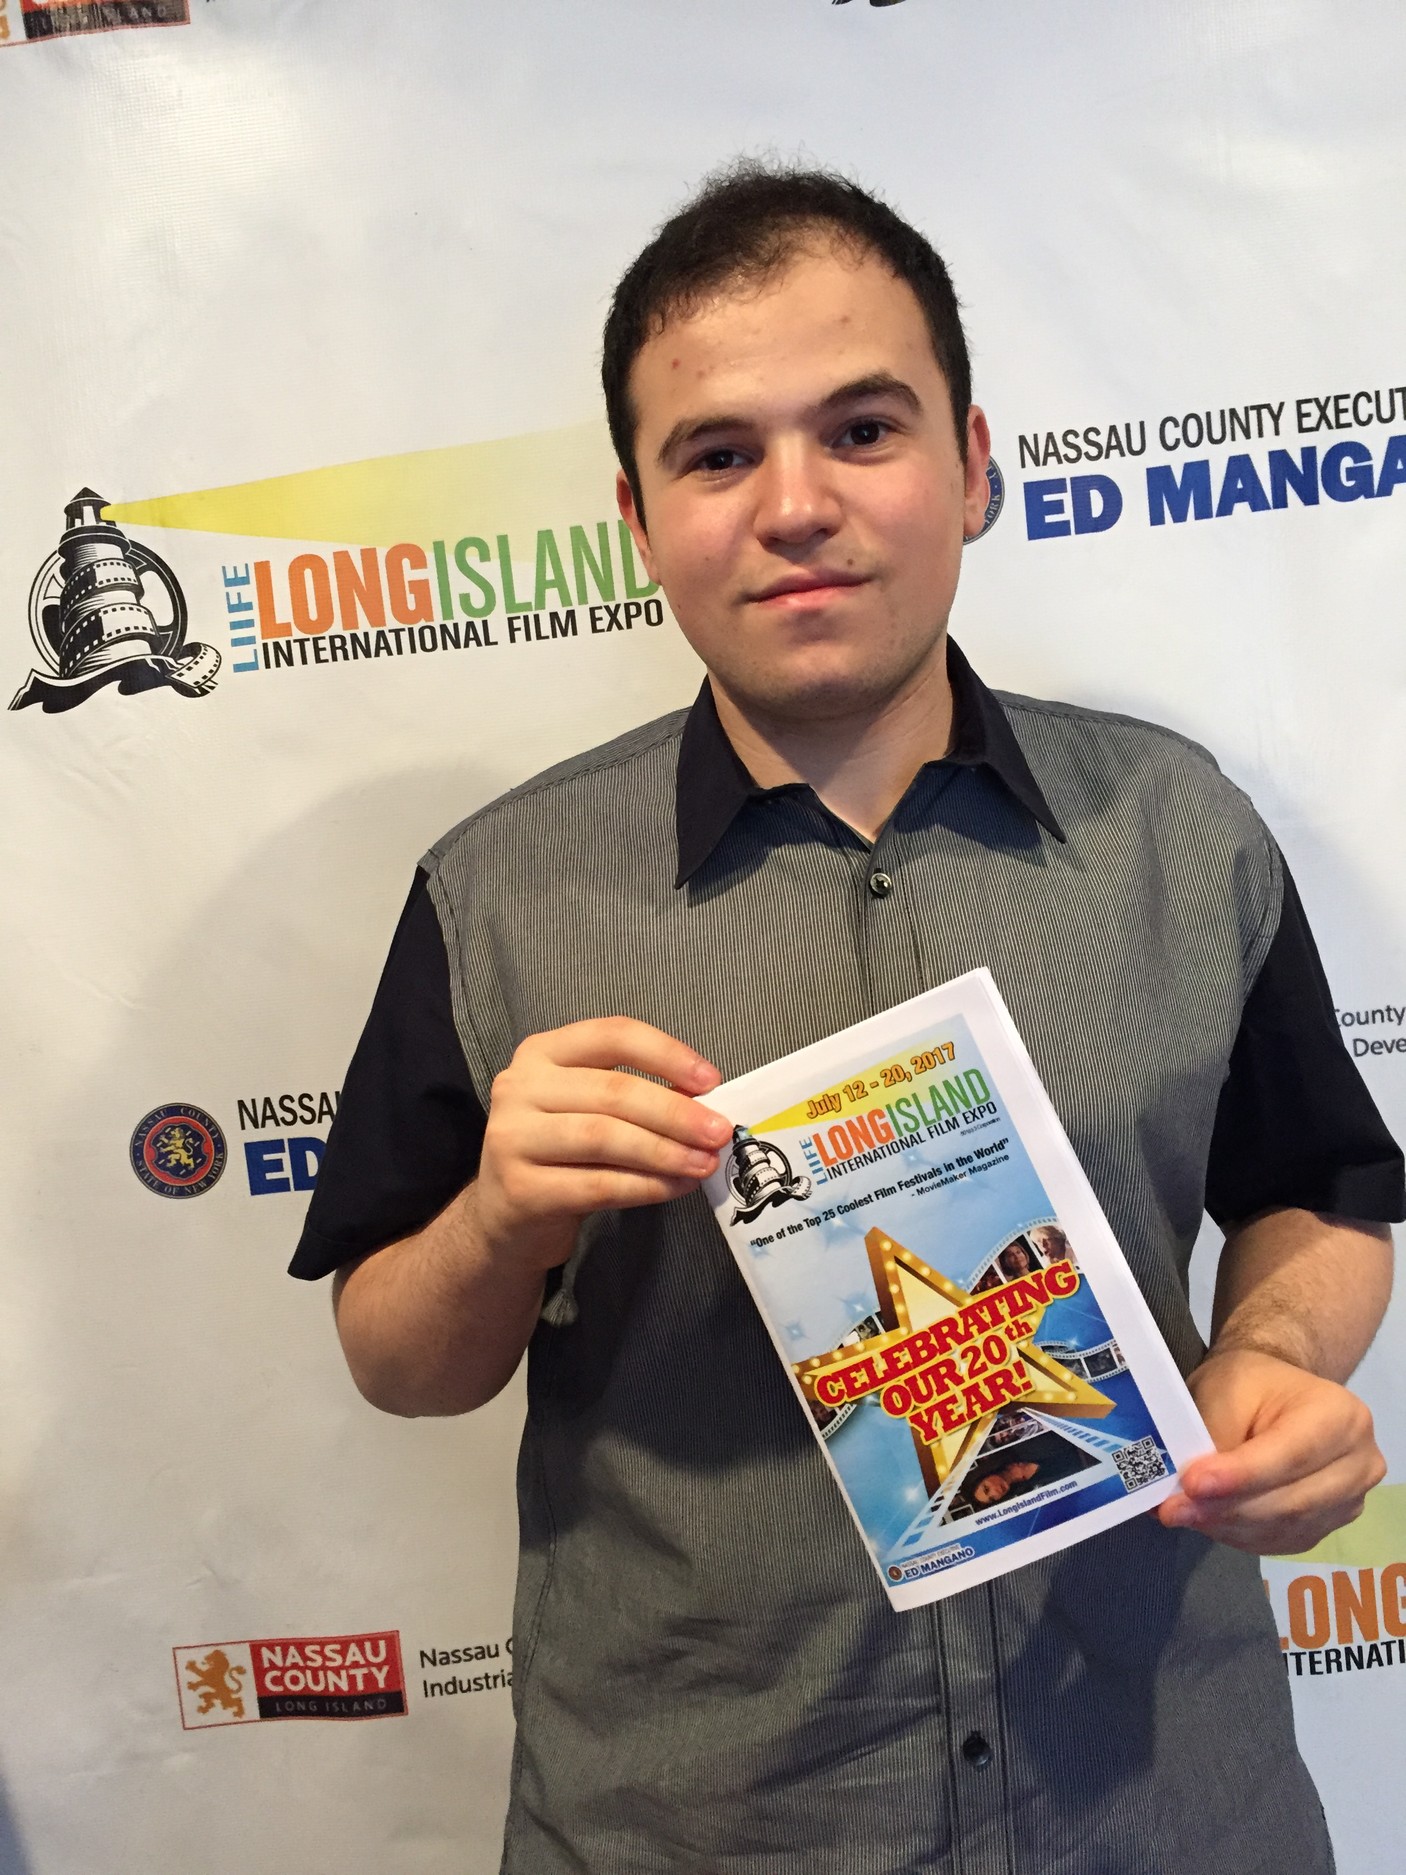 Max Hechtman at the Long Island International Film Expo.